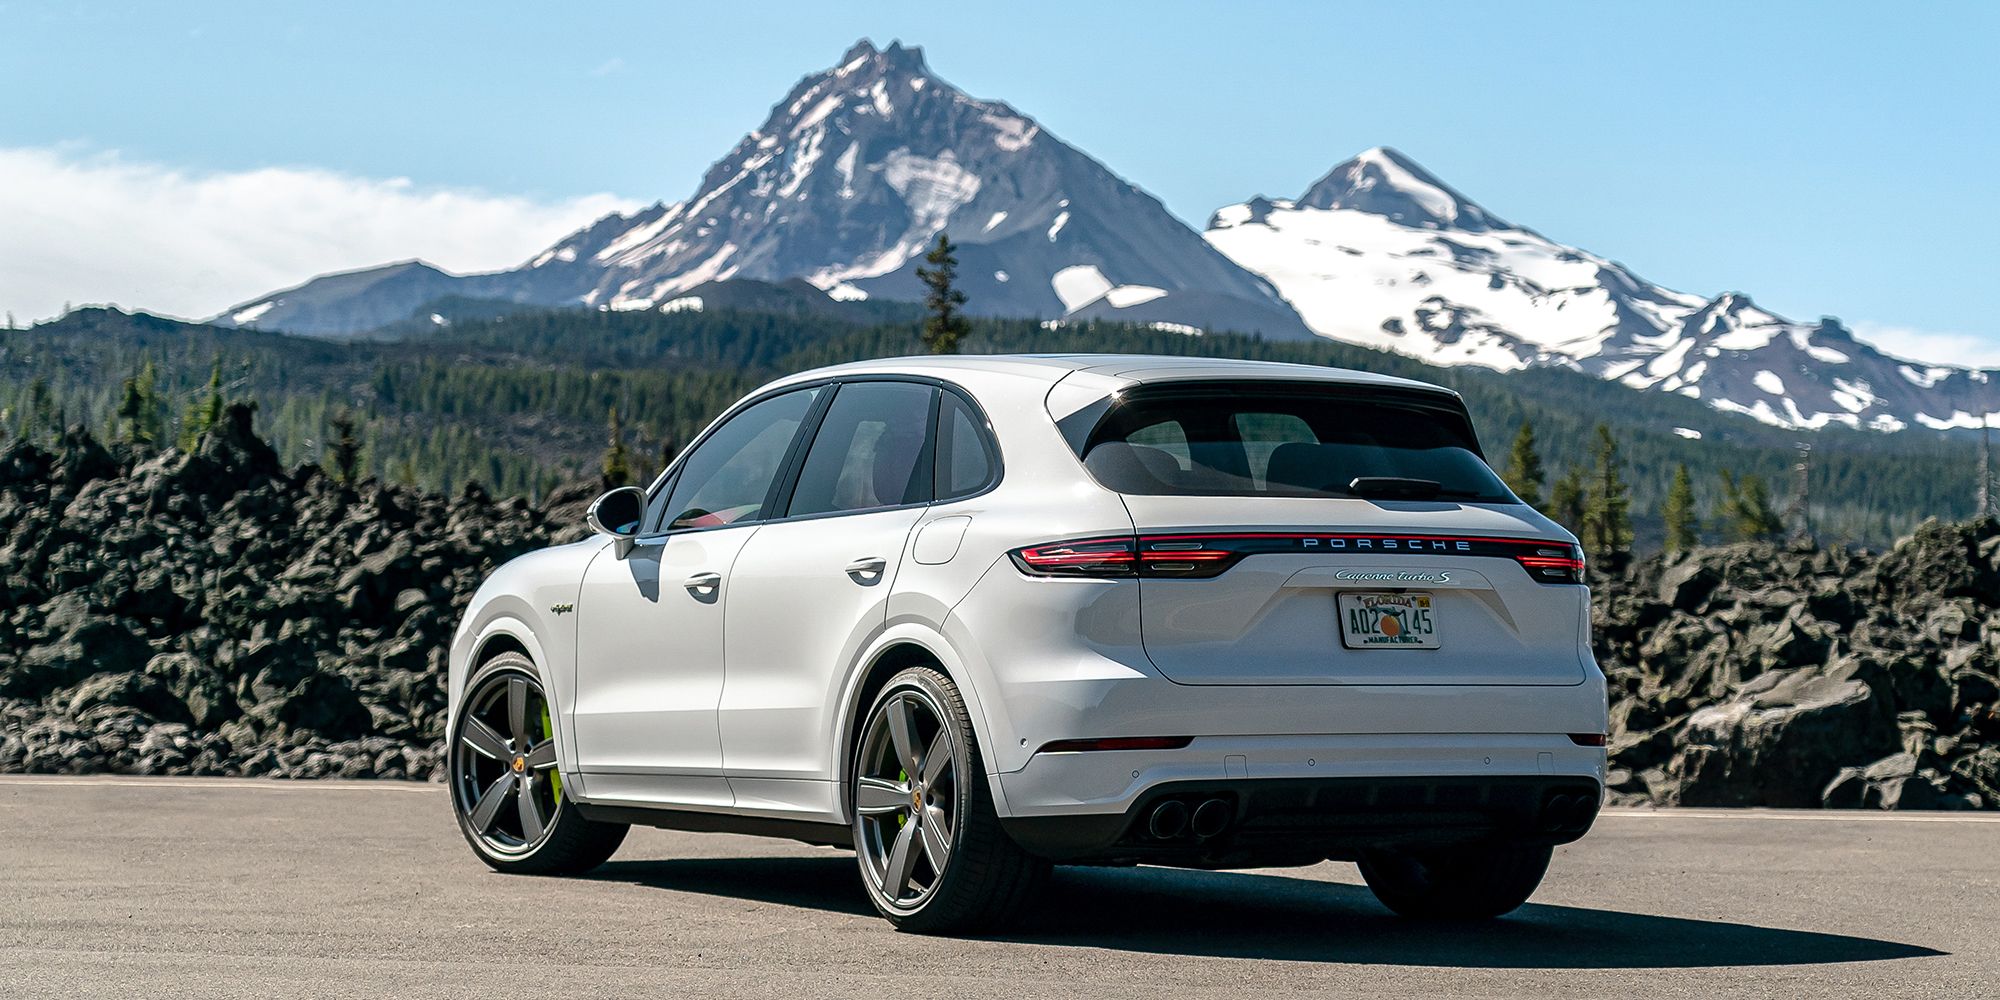 The rear of the Cayenne Turbo S E-Hybrid